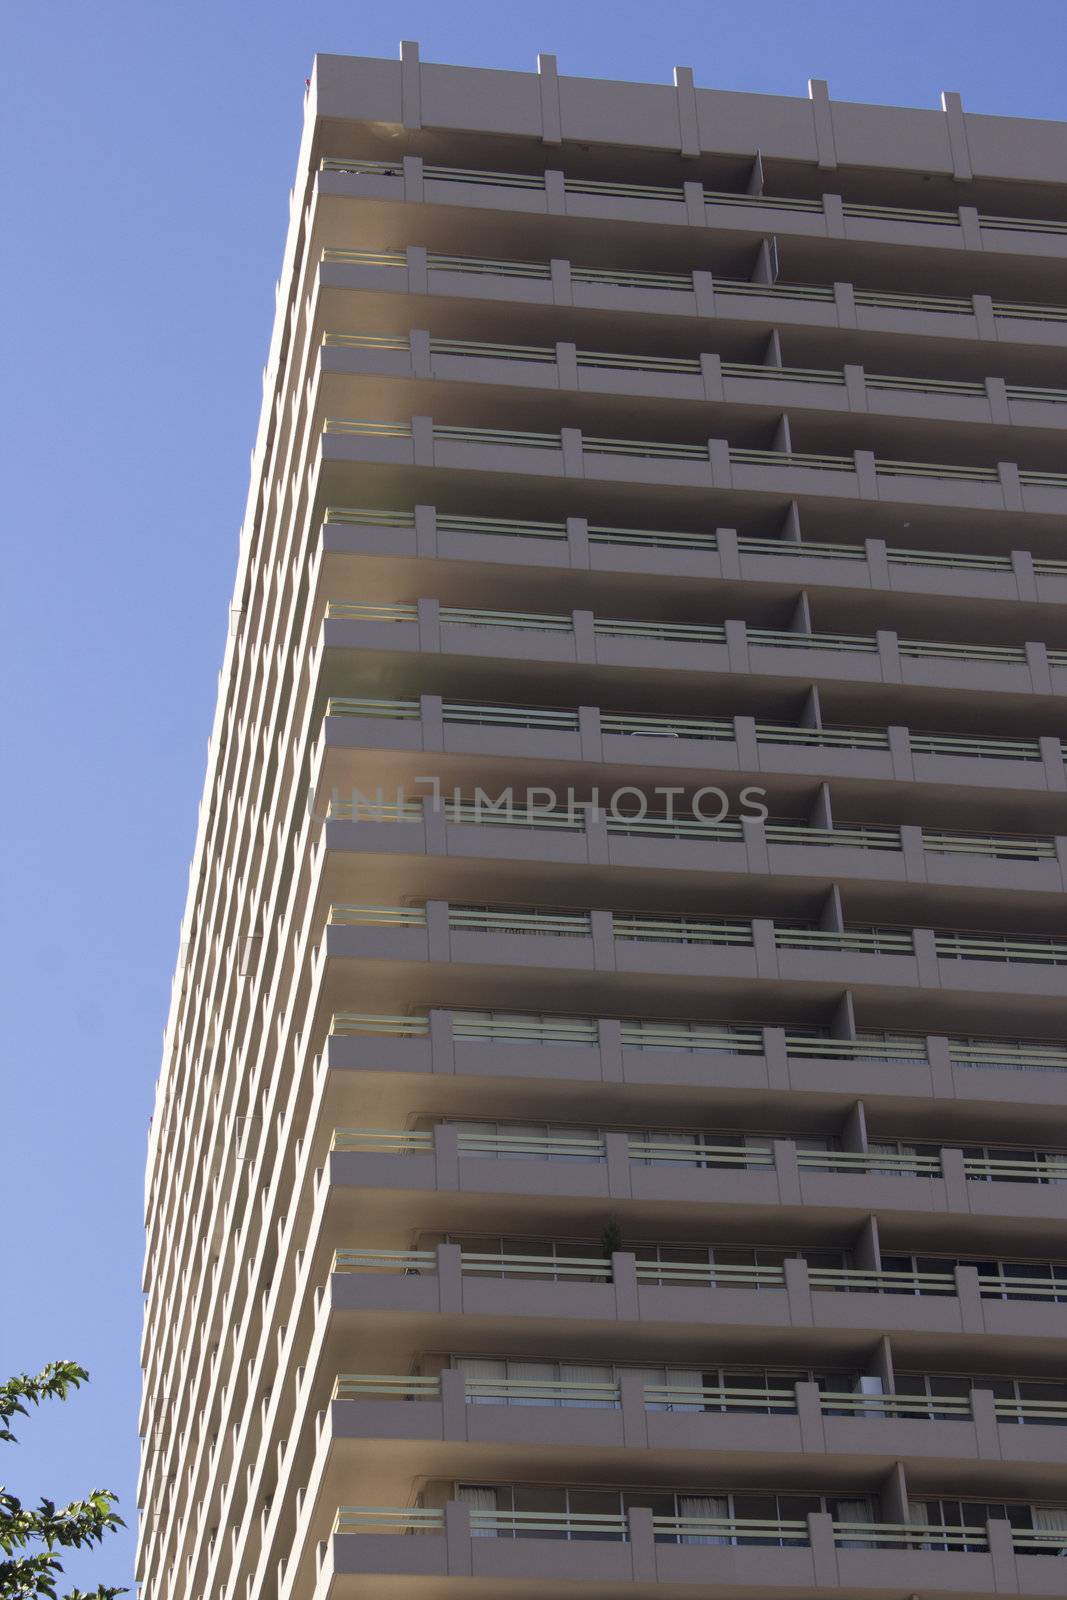 Condo apartment building by jeremywhat